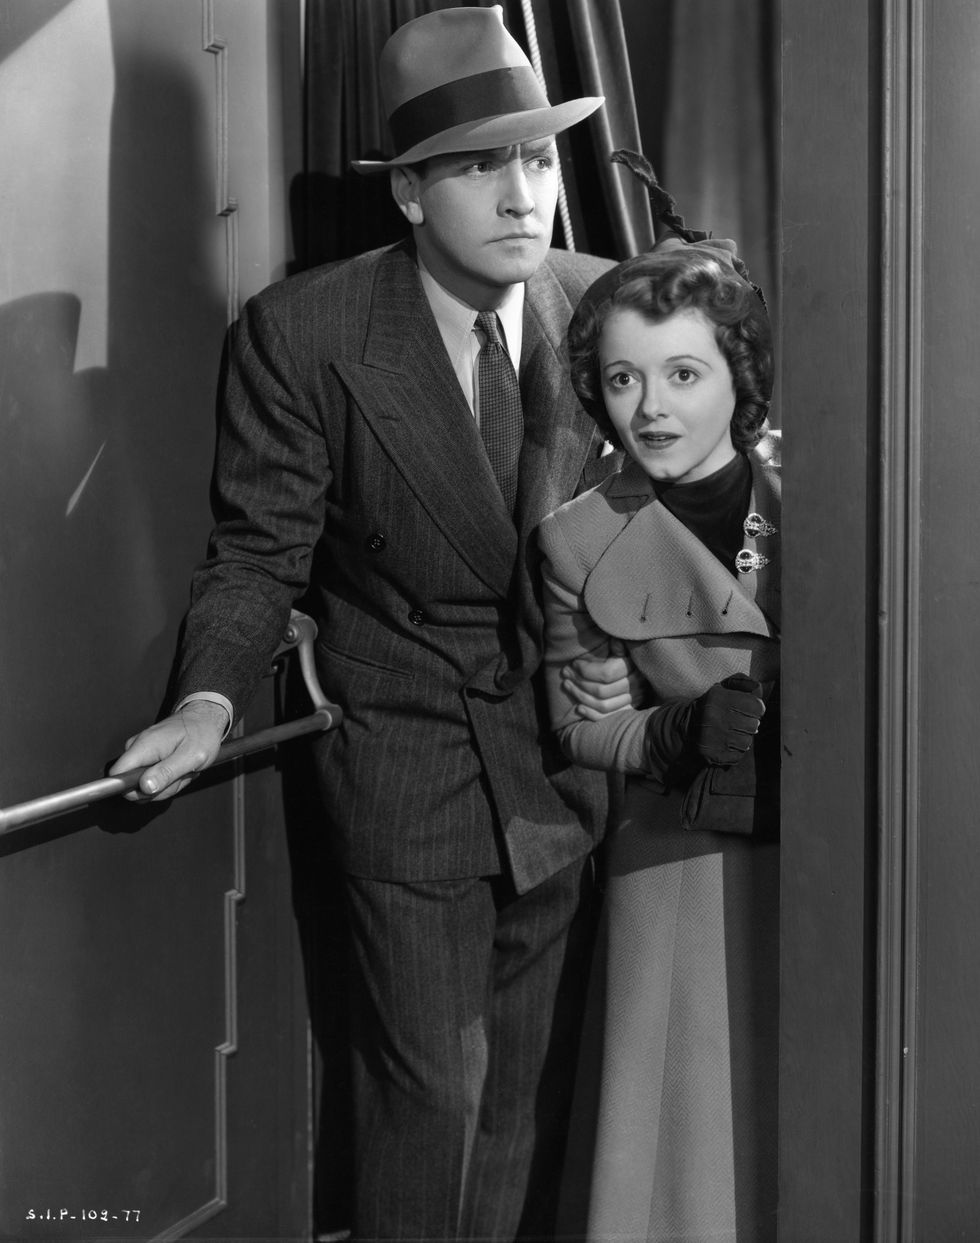 Janet Gaynor and Fredric March in a Still from A Star is Born